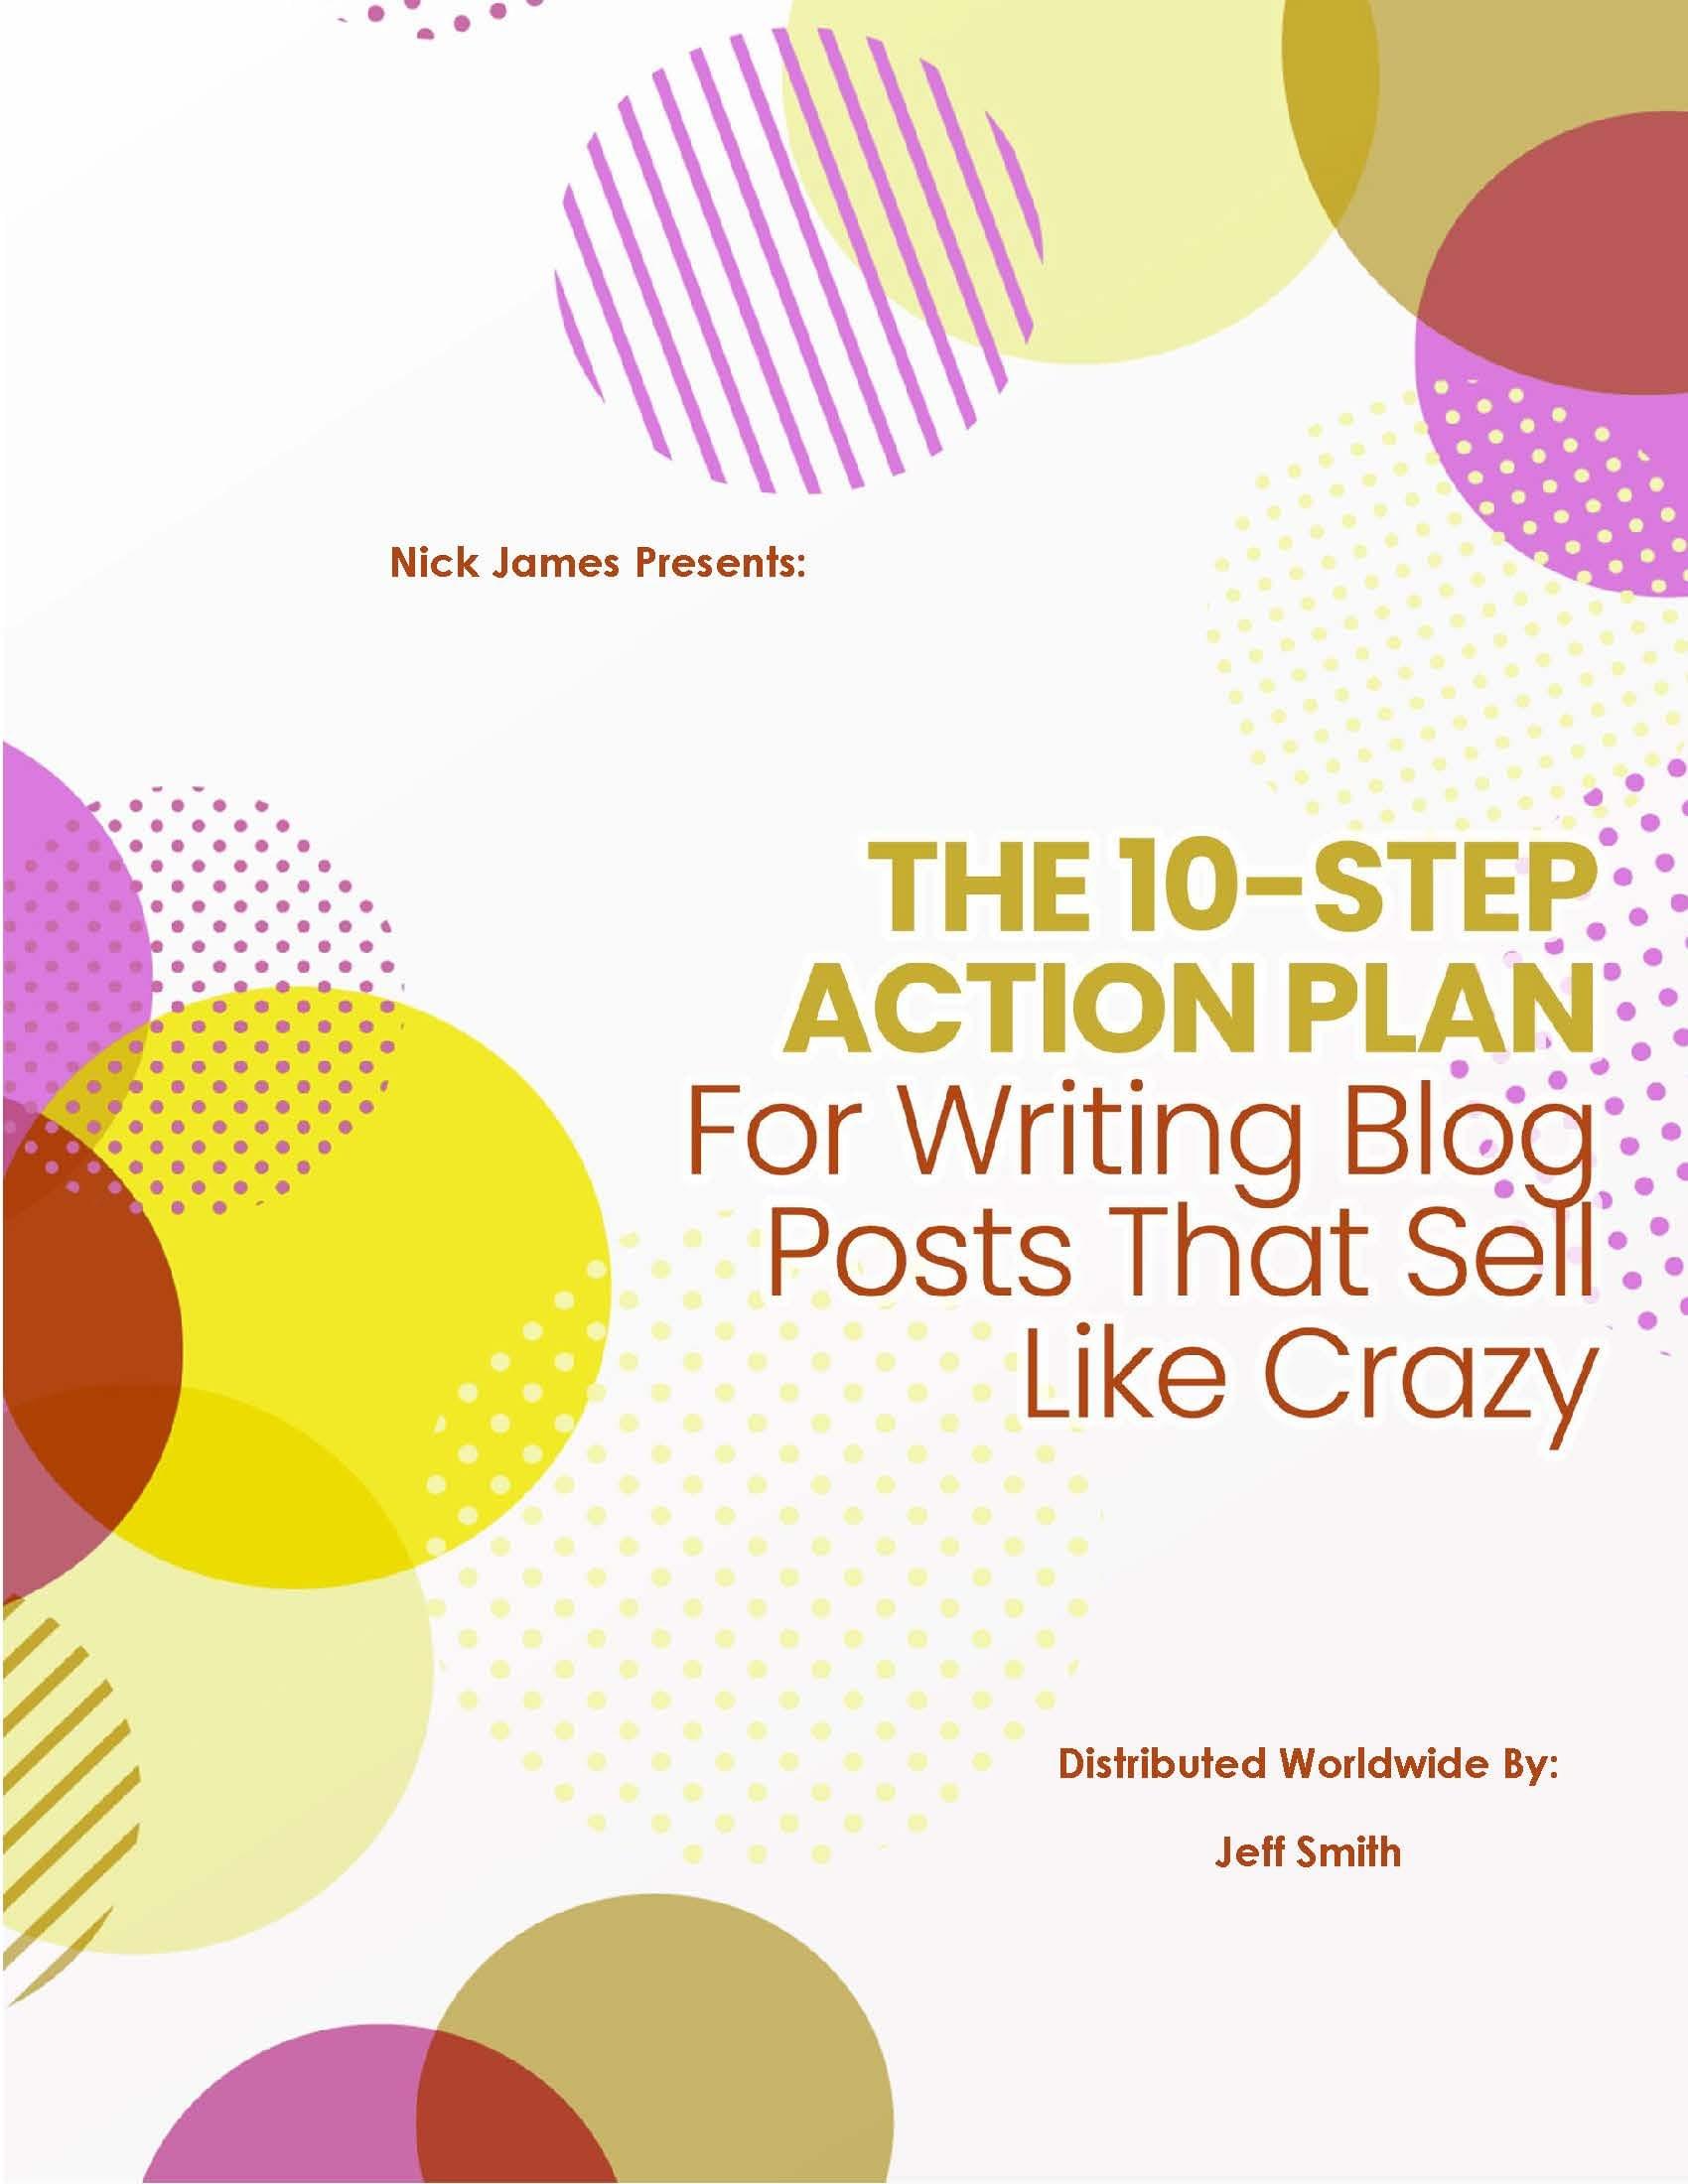 The 10-Step Action Plan For Writing Blog Posts That Sell Like Crazy